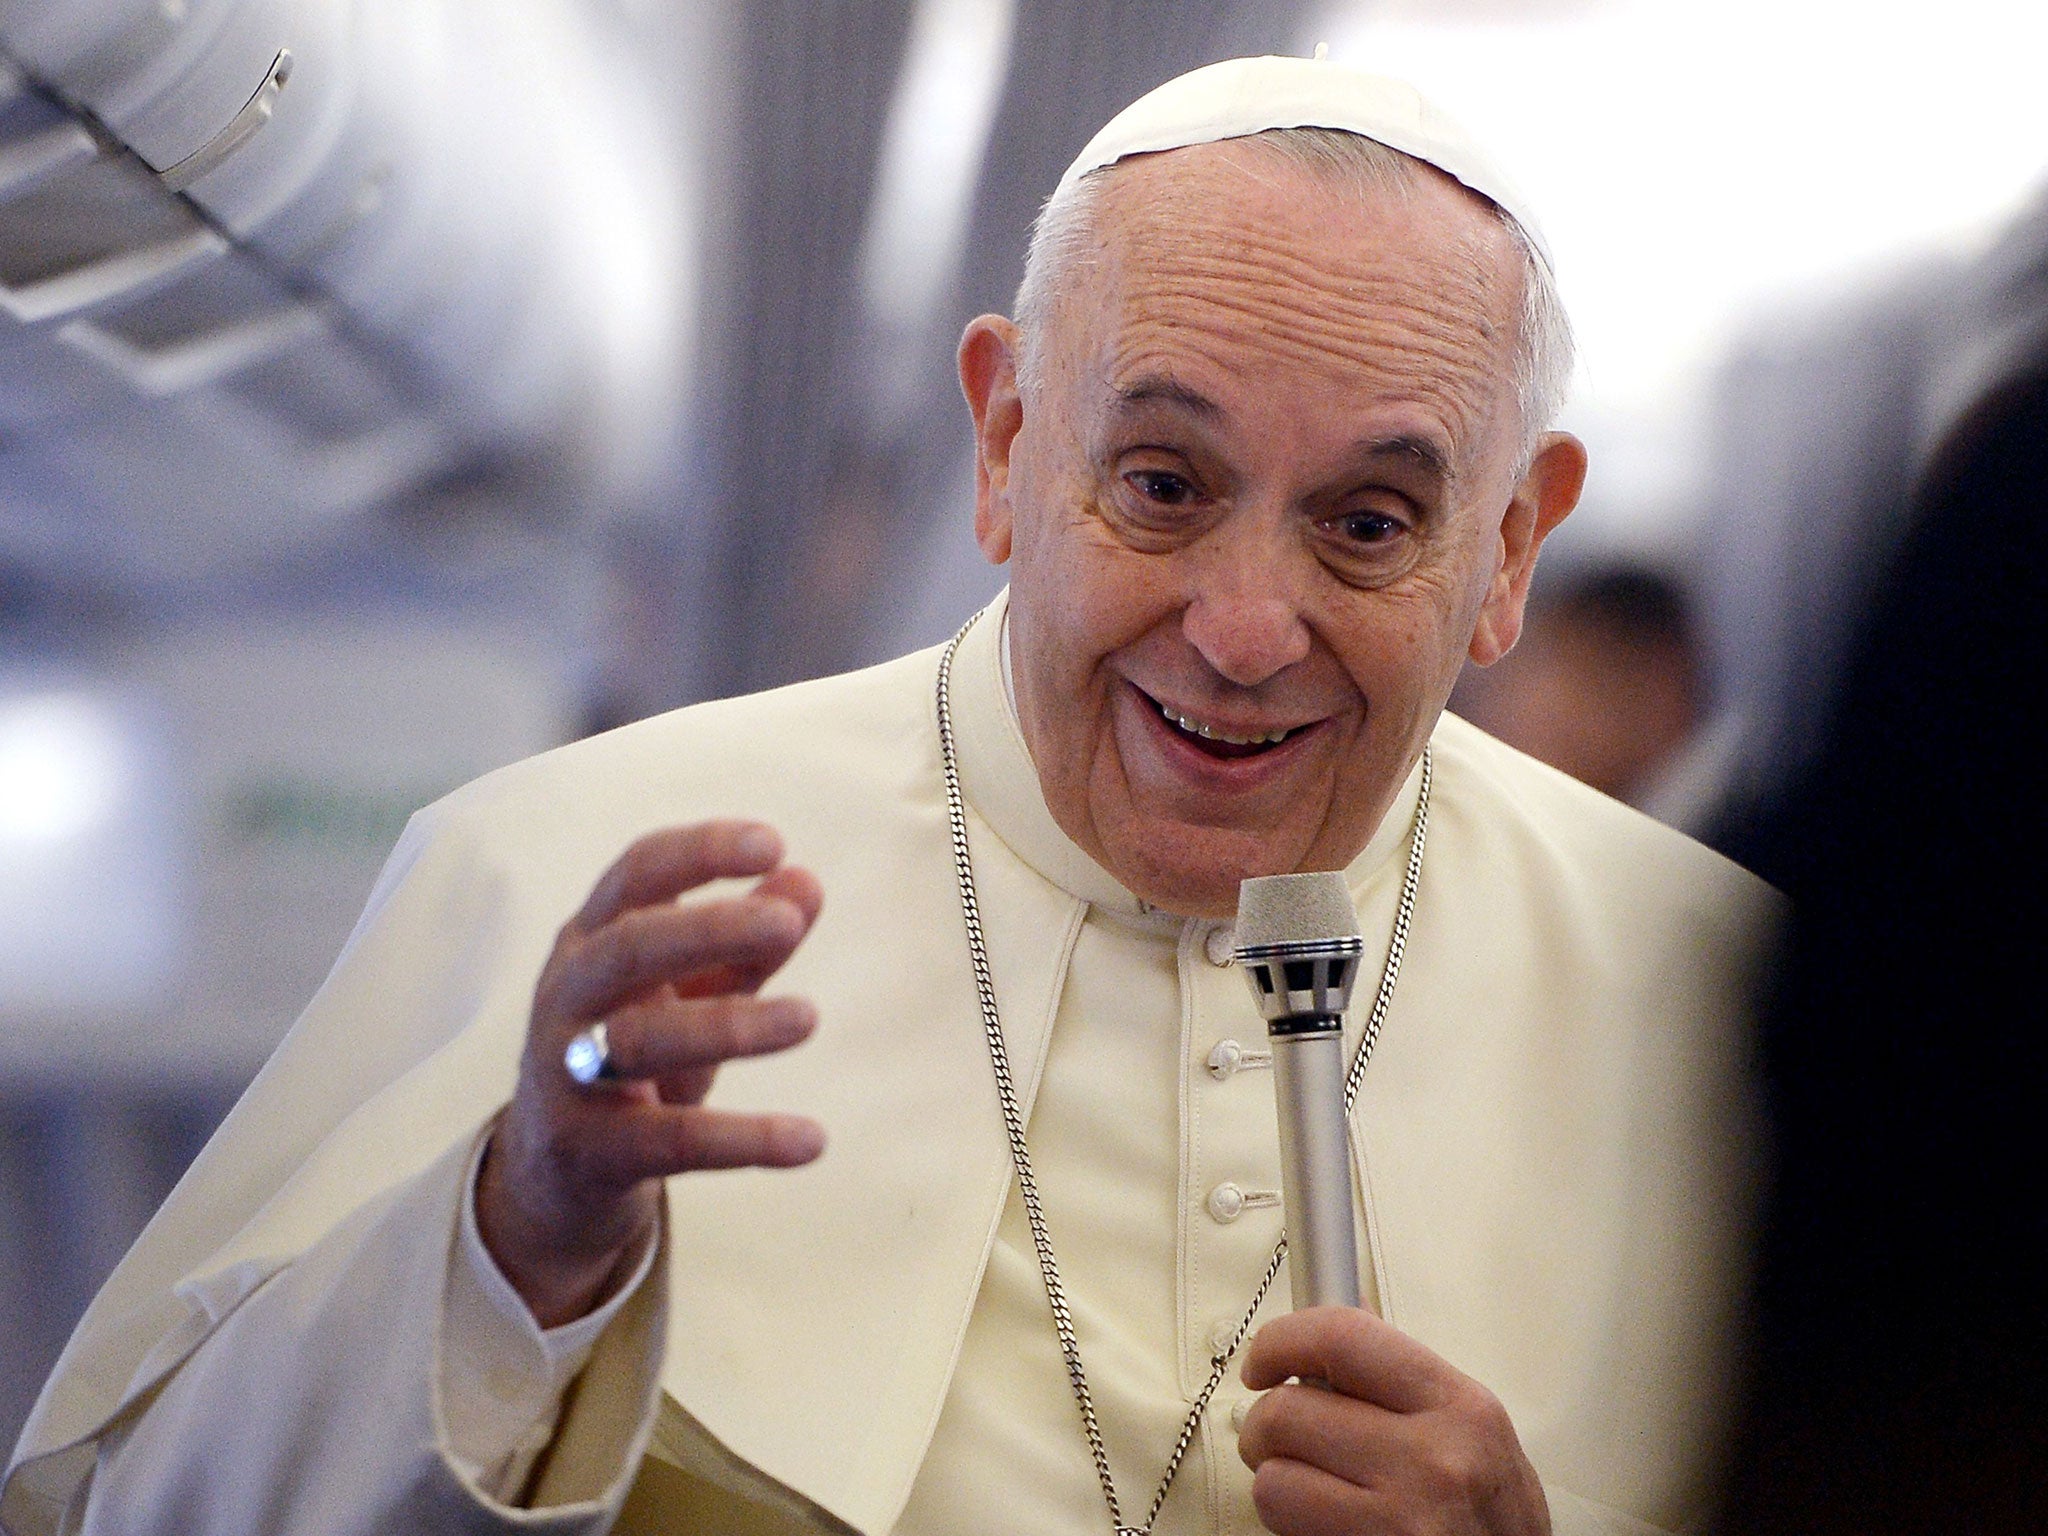 Pope Francis gives a press conference aboard the plane carrying him to Tirana, Albania on 21 September, 2014